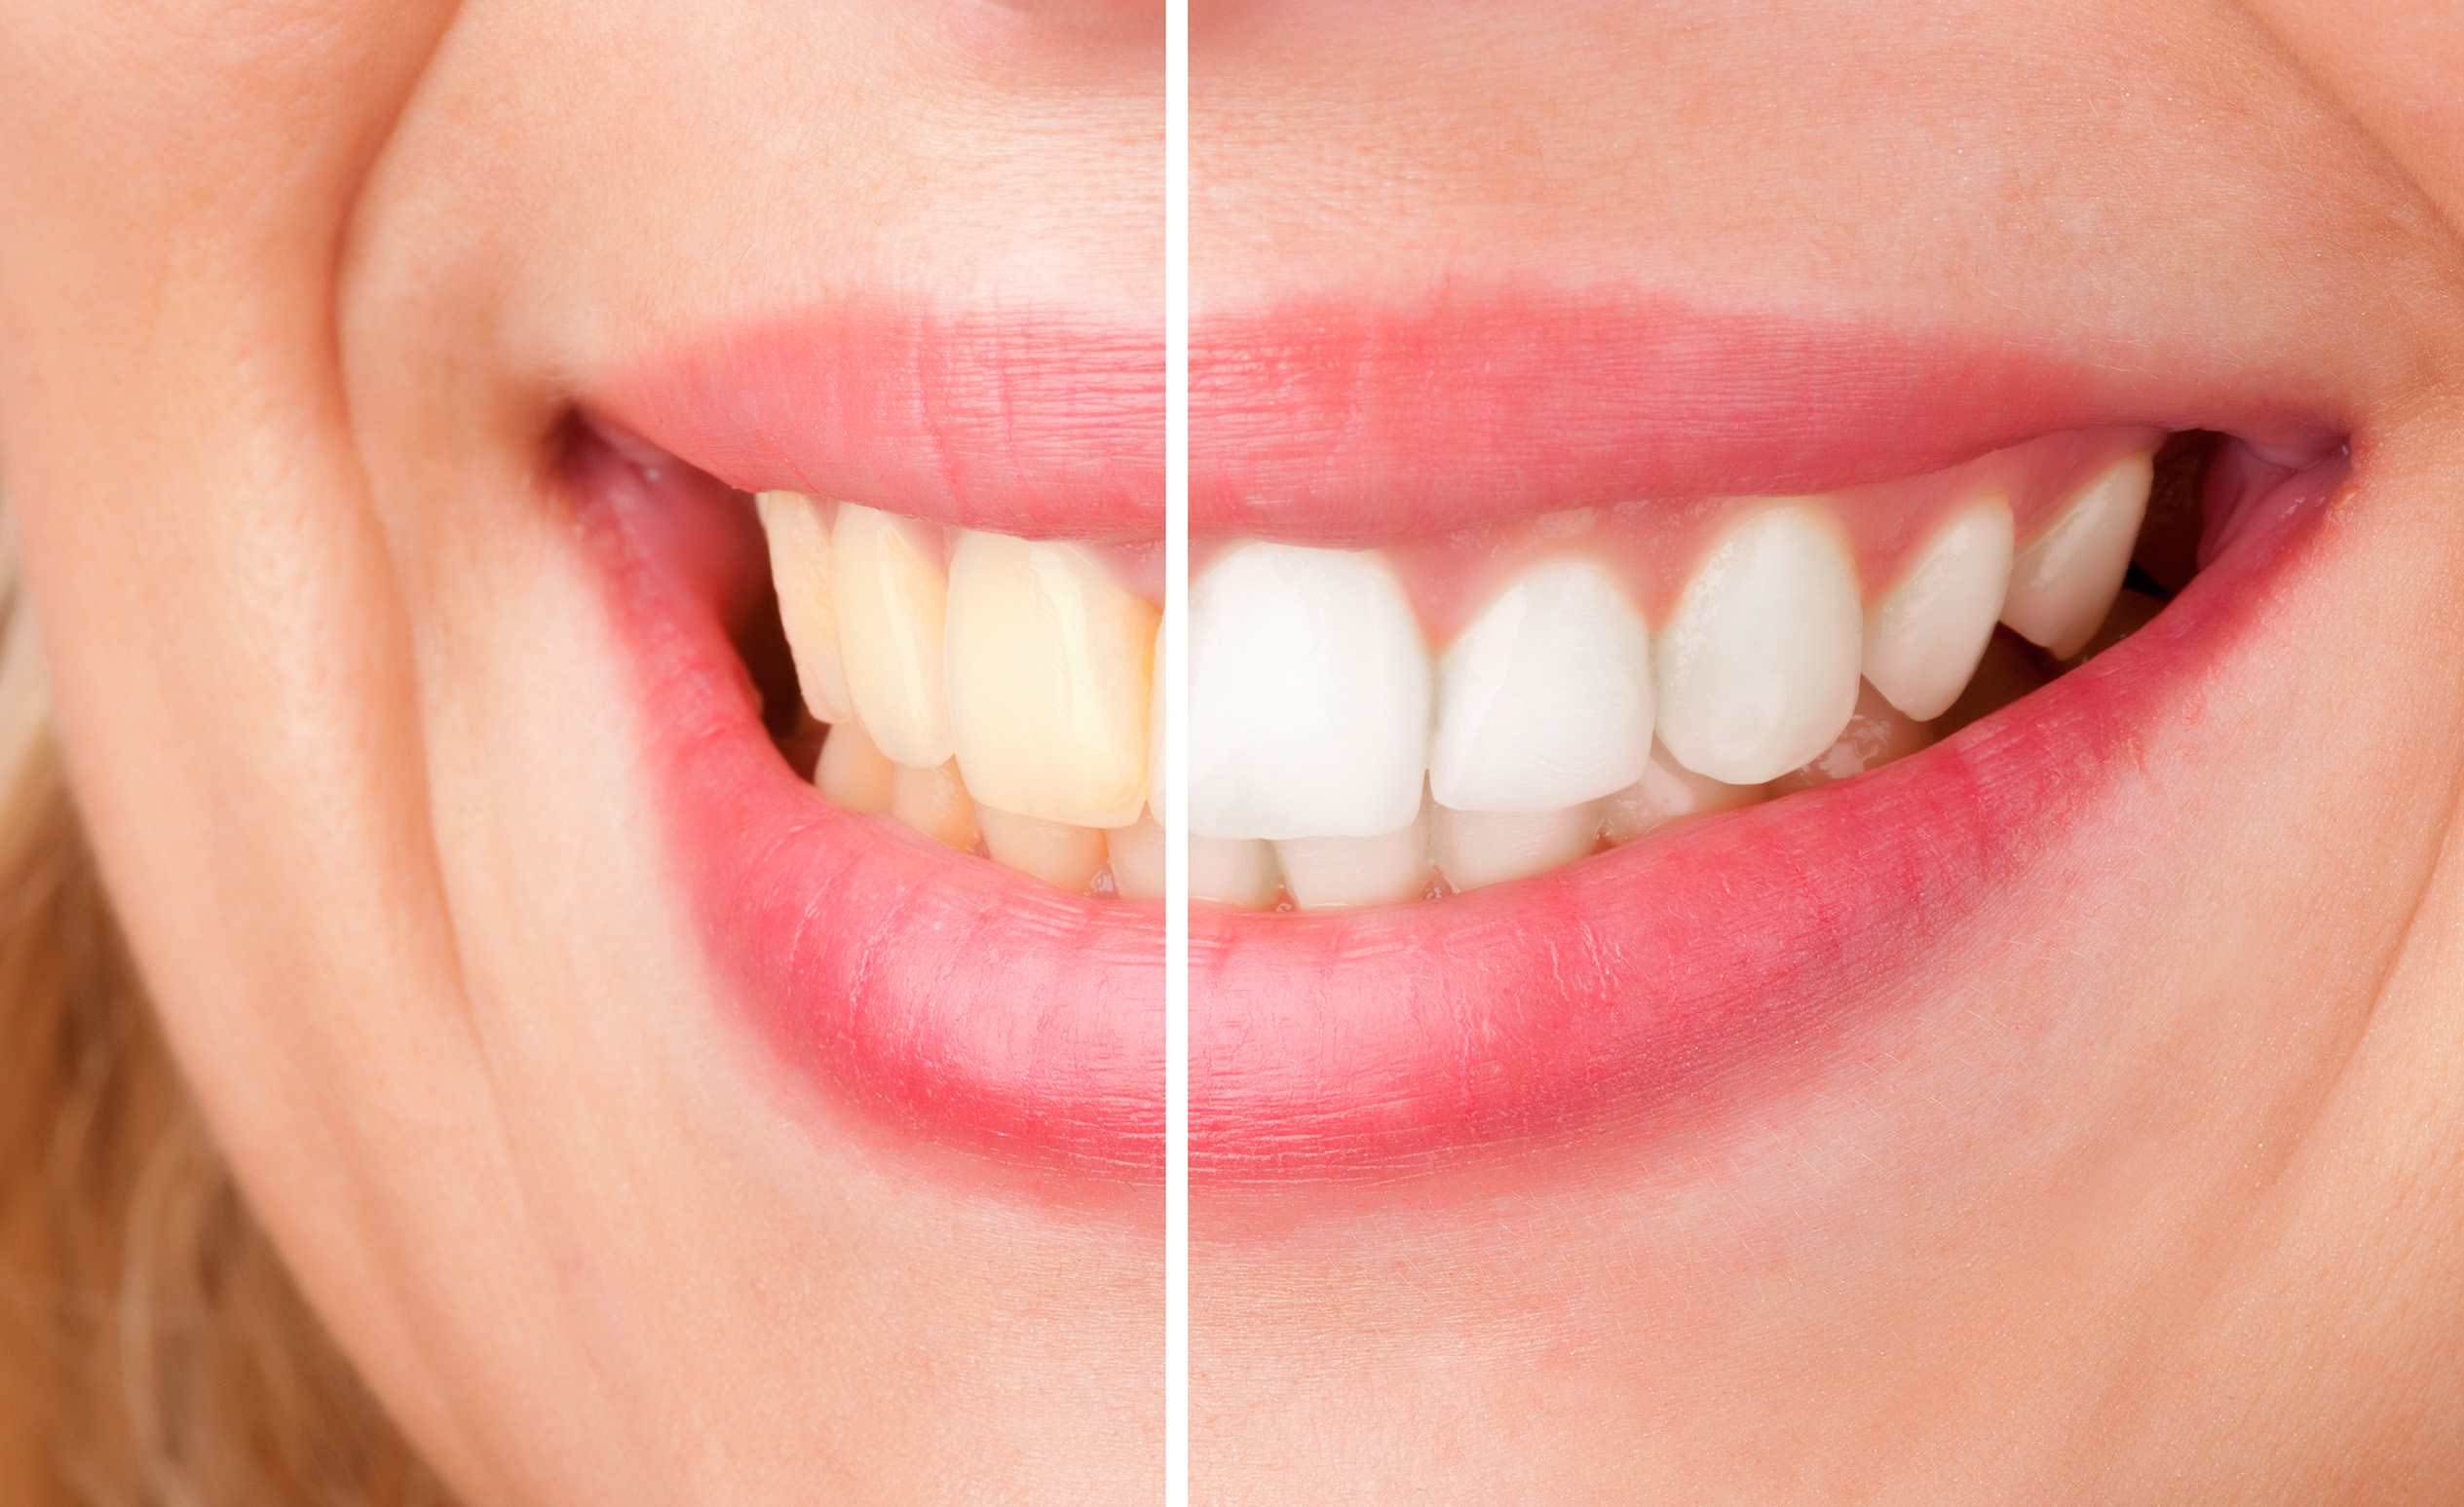 A woman’s smile before and after tooth whitening.